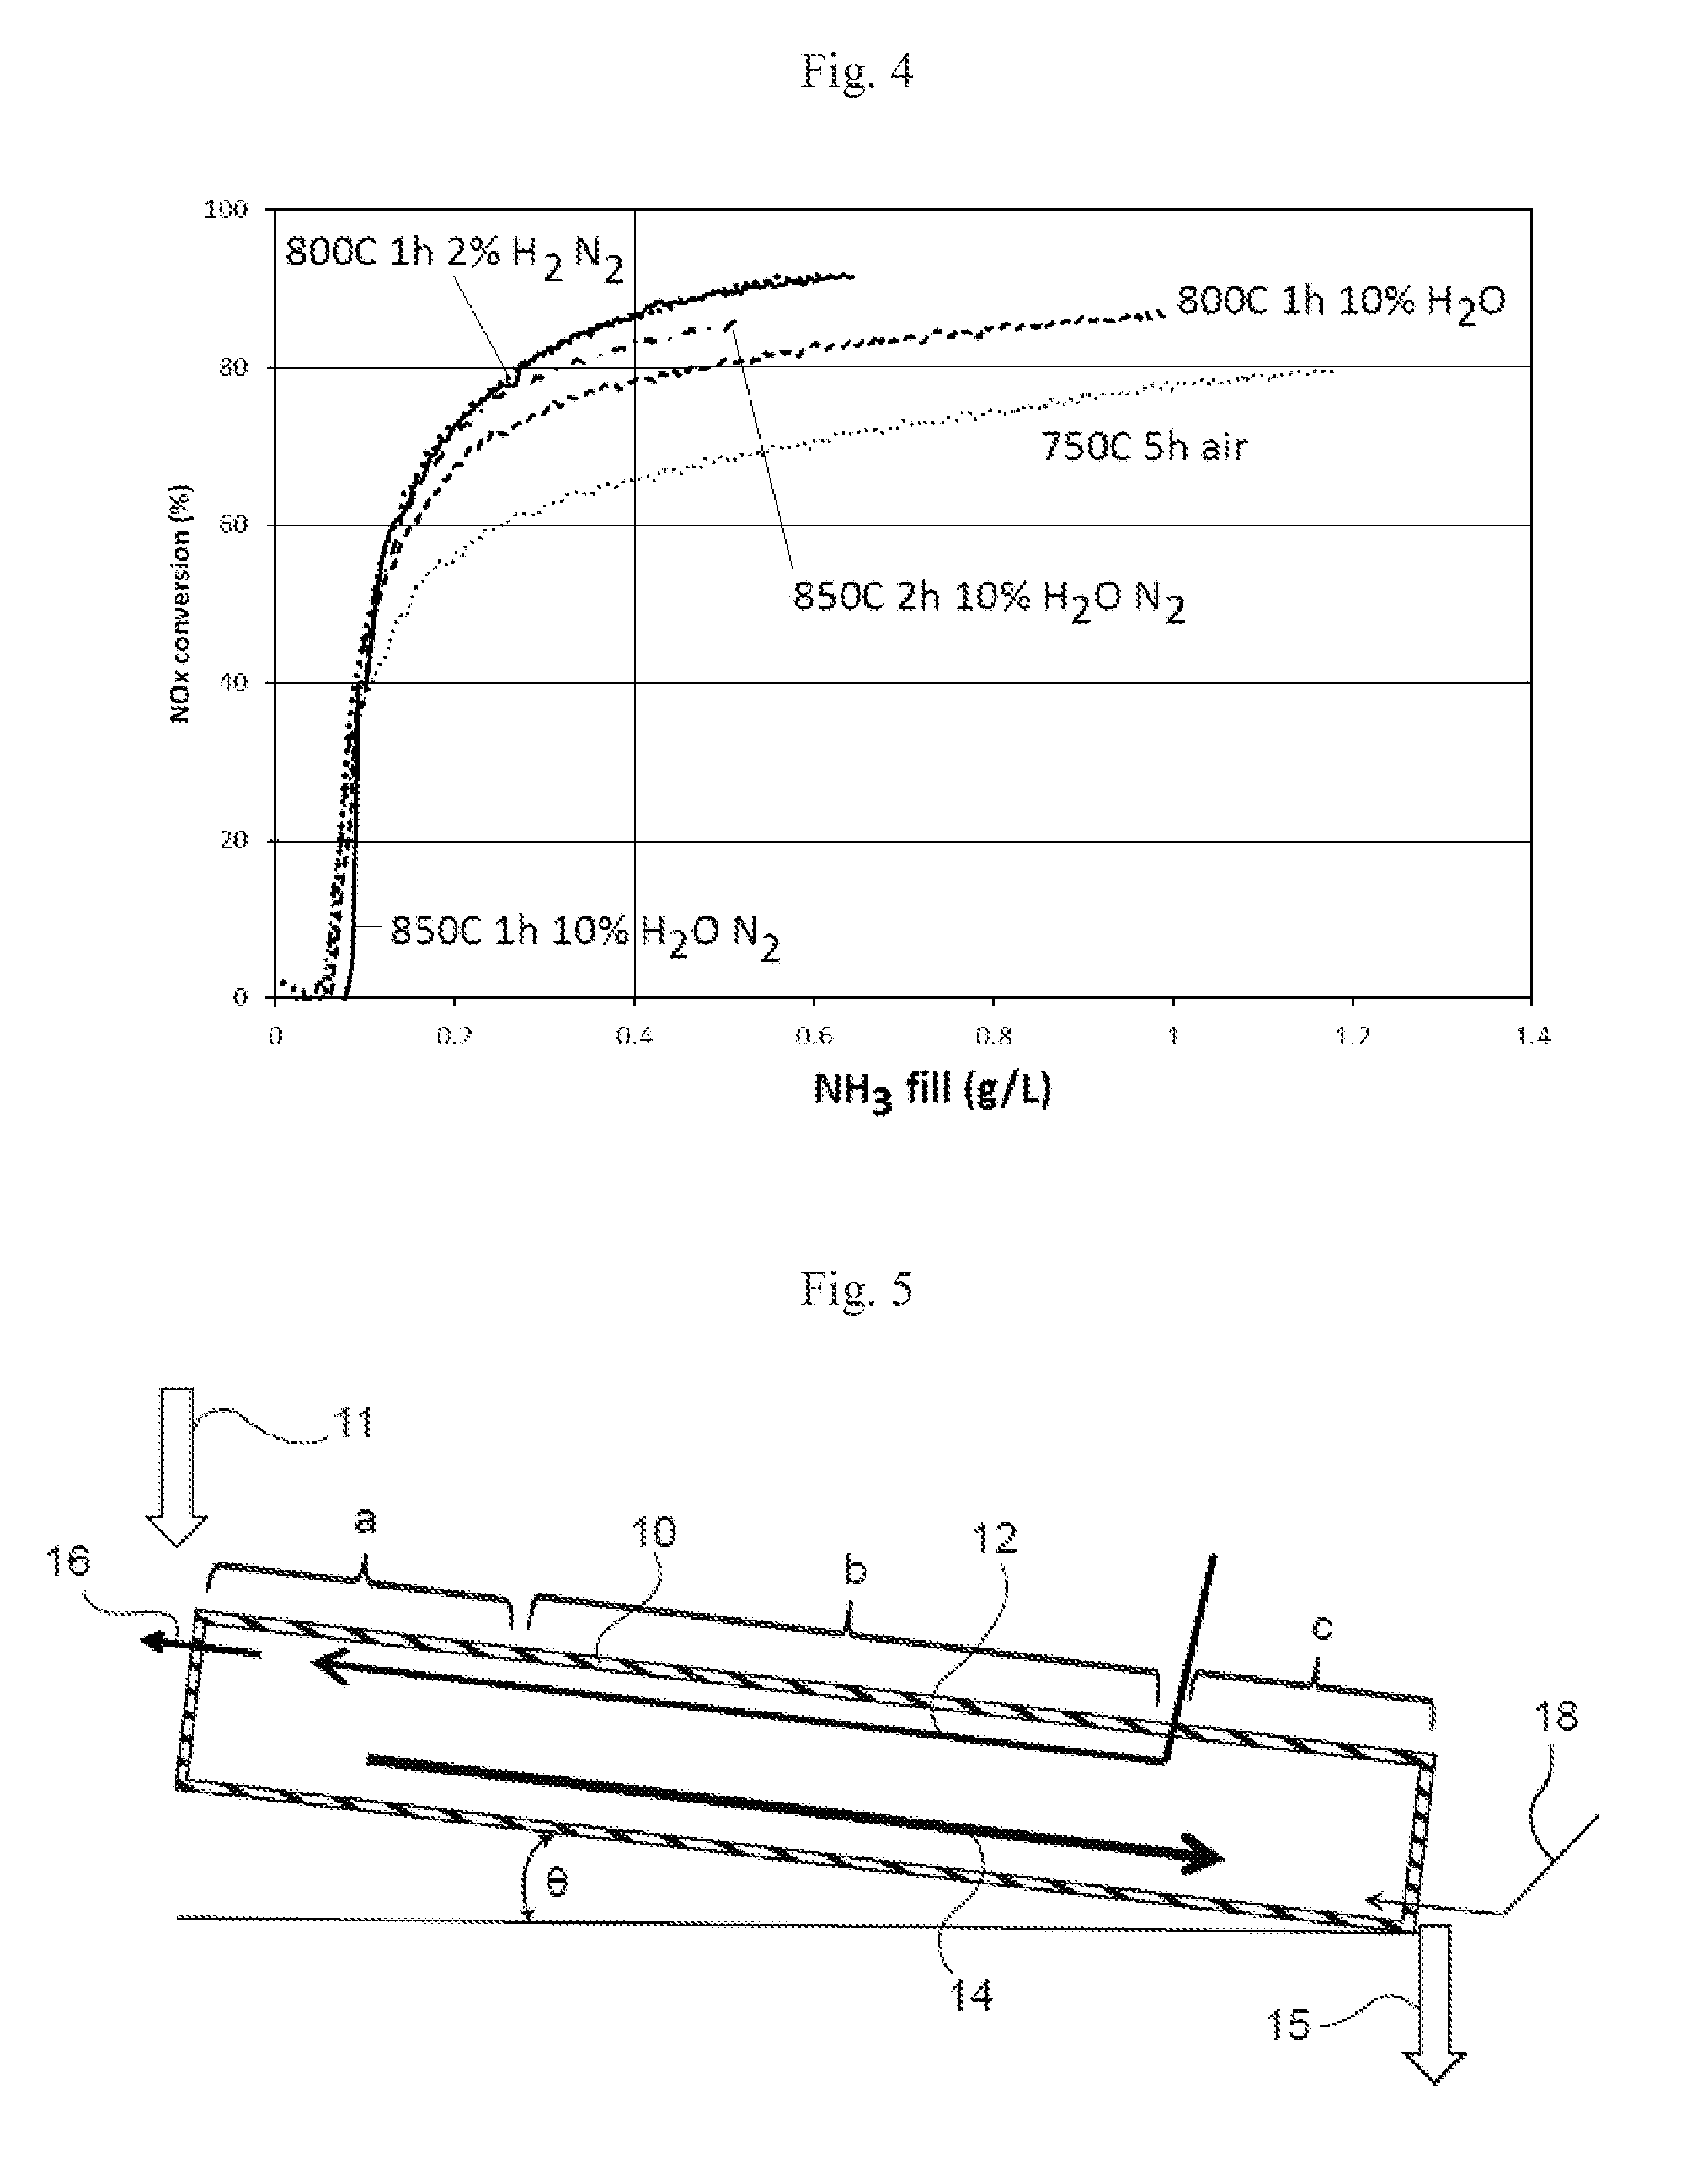 Scr catalysts having improved low temperature performance, and methods of making and using the same